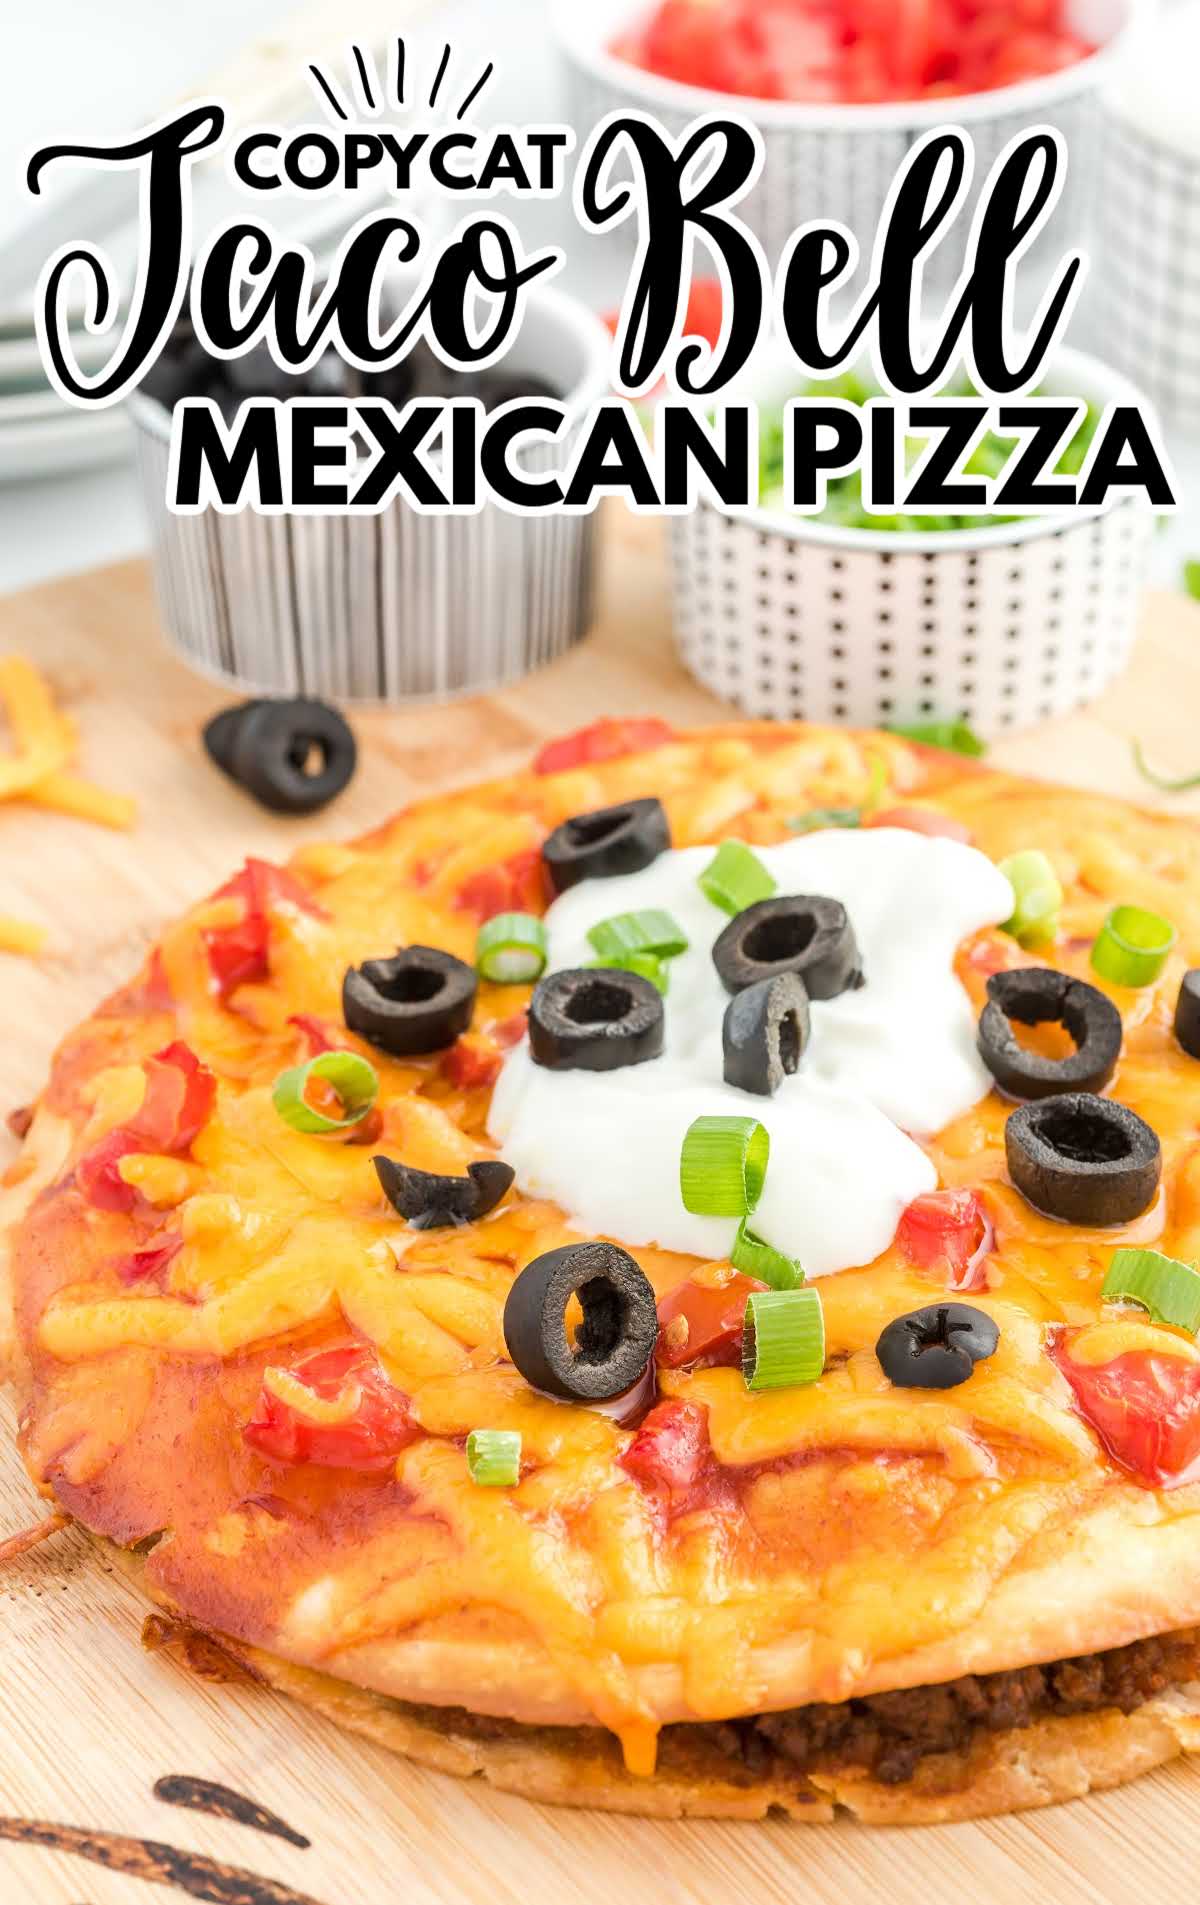 A pizza sitting on top of a cutting board with a cake, with Taco Bell